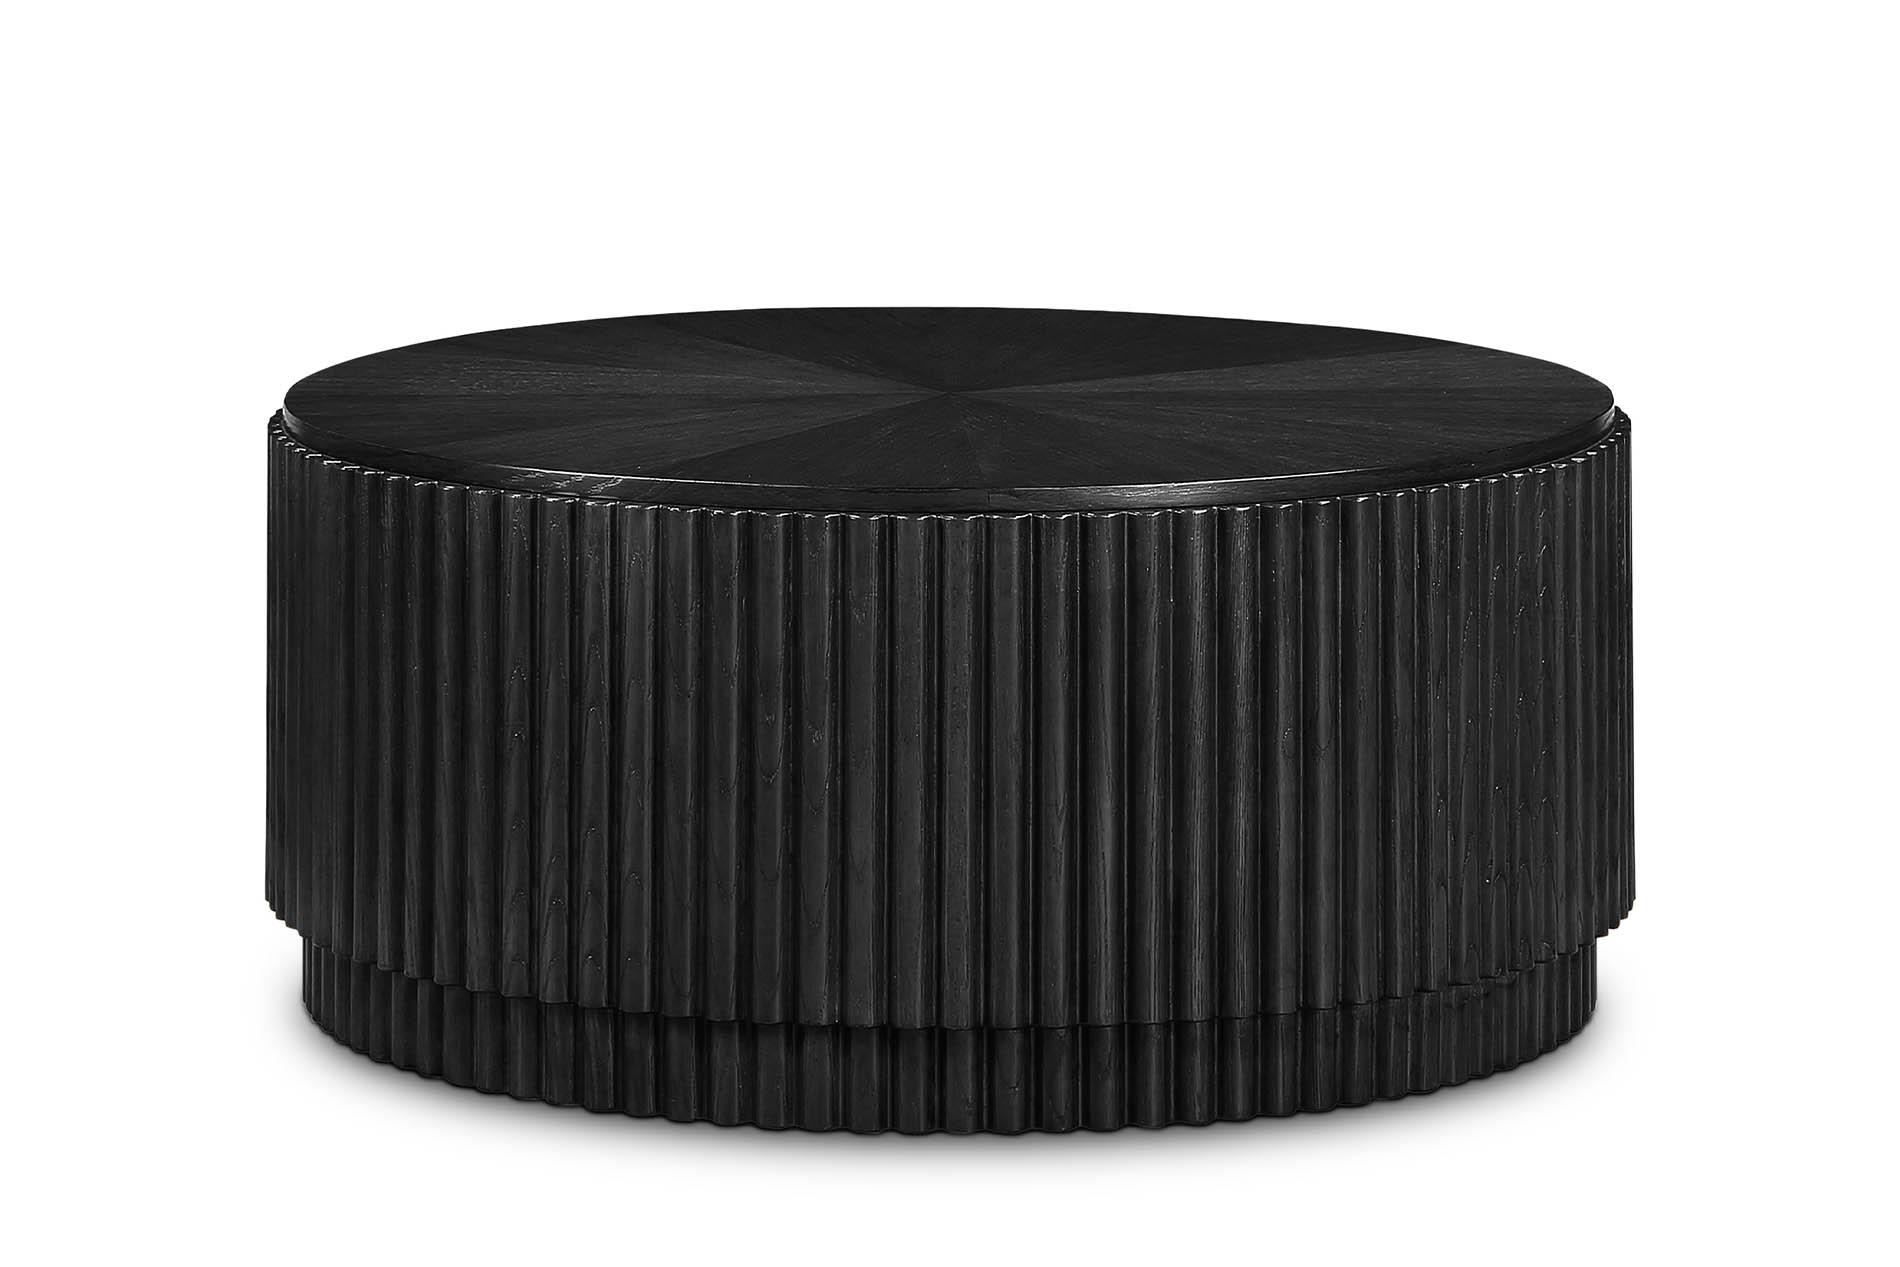 Contemporary, Modern Coffee Table 99055Black-CT 99055Black-CT in Black 